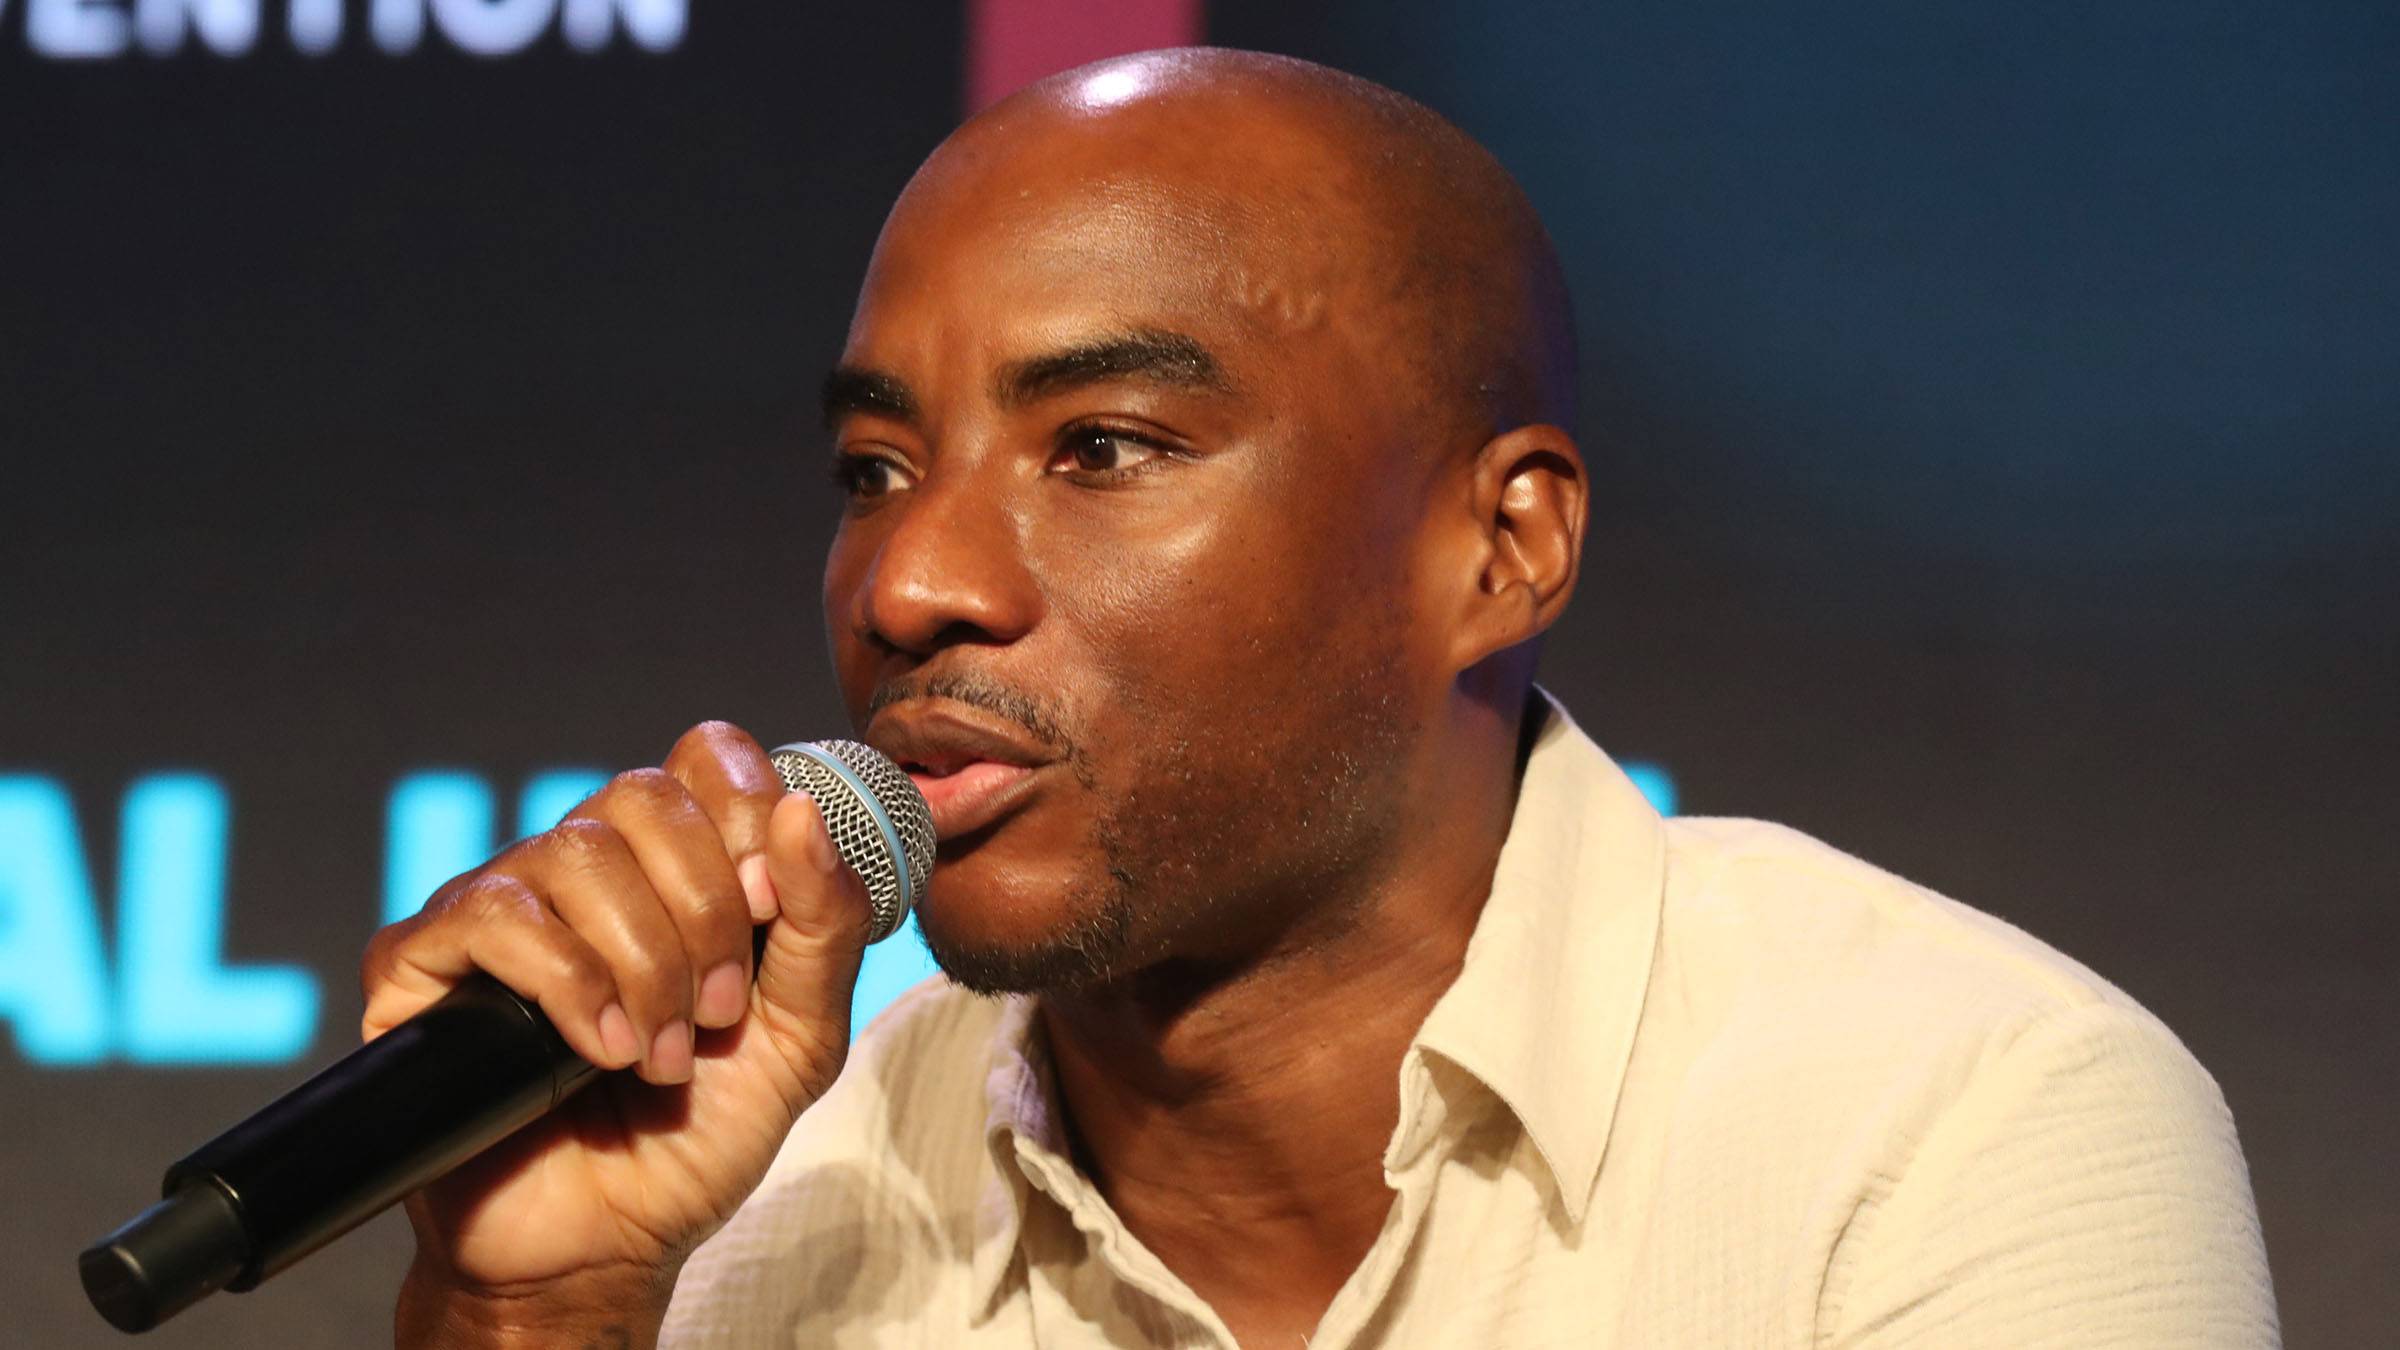 Charlamagne Tha God Shares There May Be One Or Two Co-Hosts Added To 'The  Breakfast Club' To Fill In Void After Angela Yee's Departure | News | BET